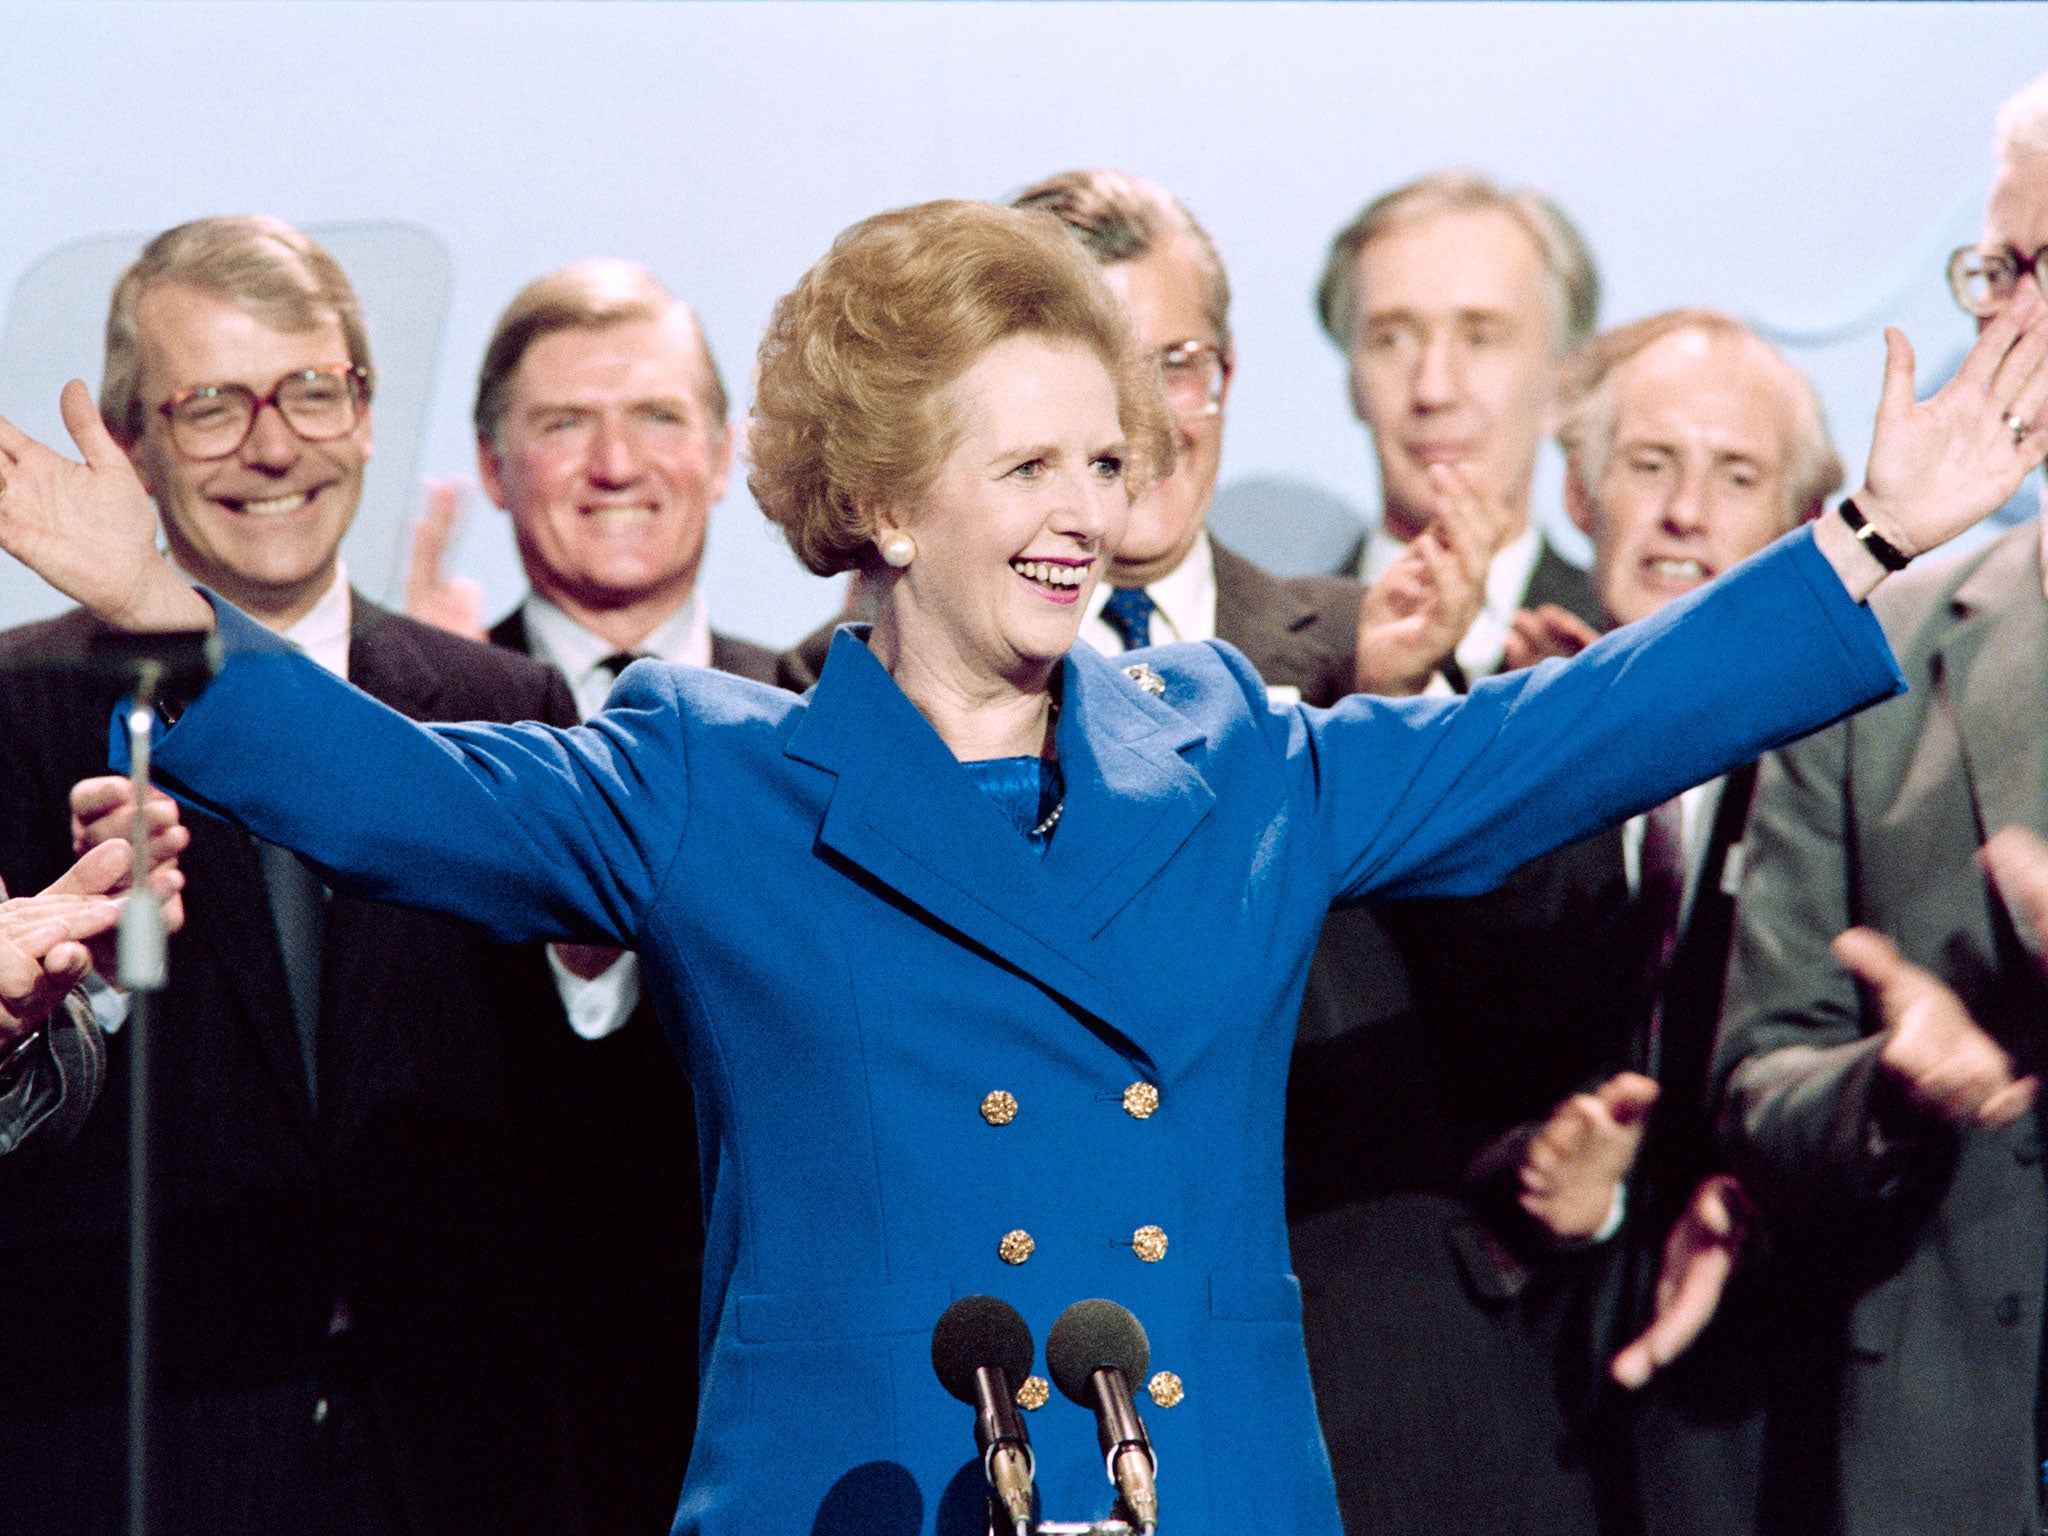 You remember not Thatcher’s mid-Eighties power suits but the woman above them (Getty)